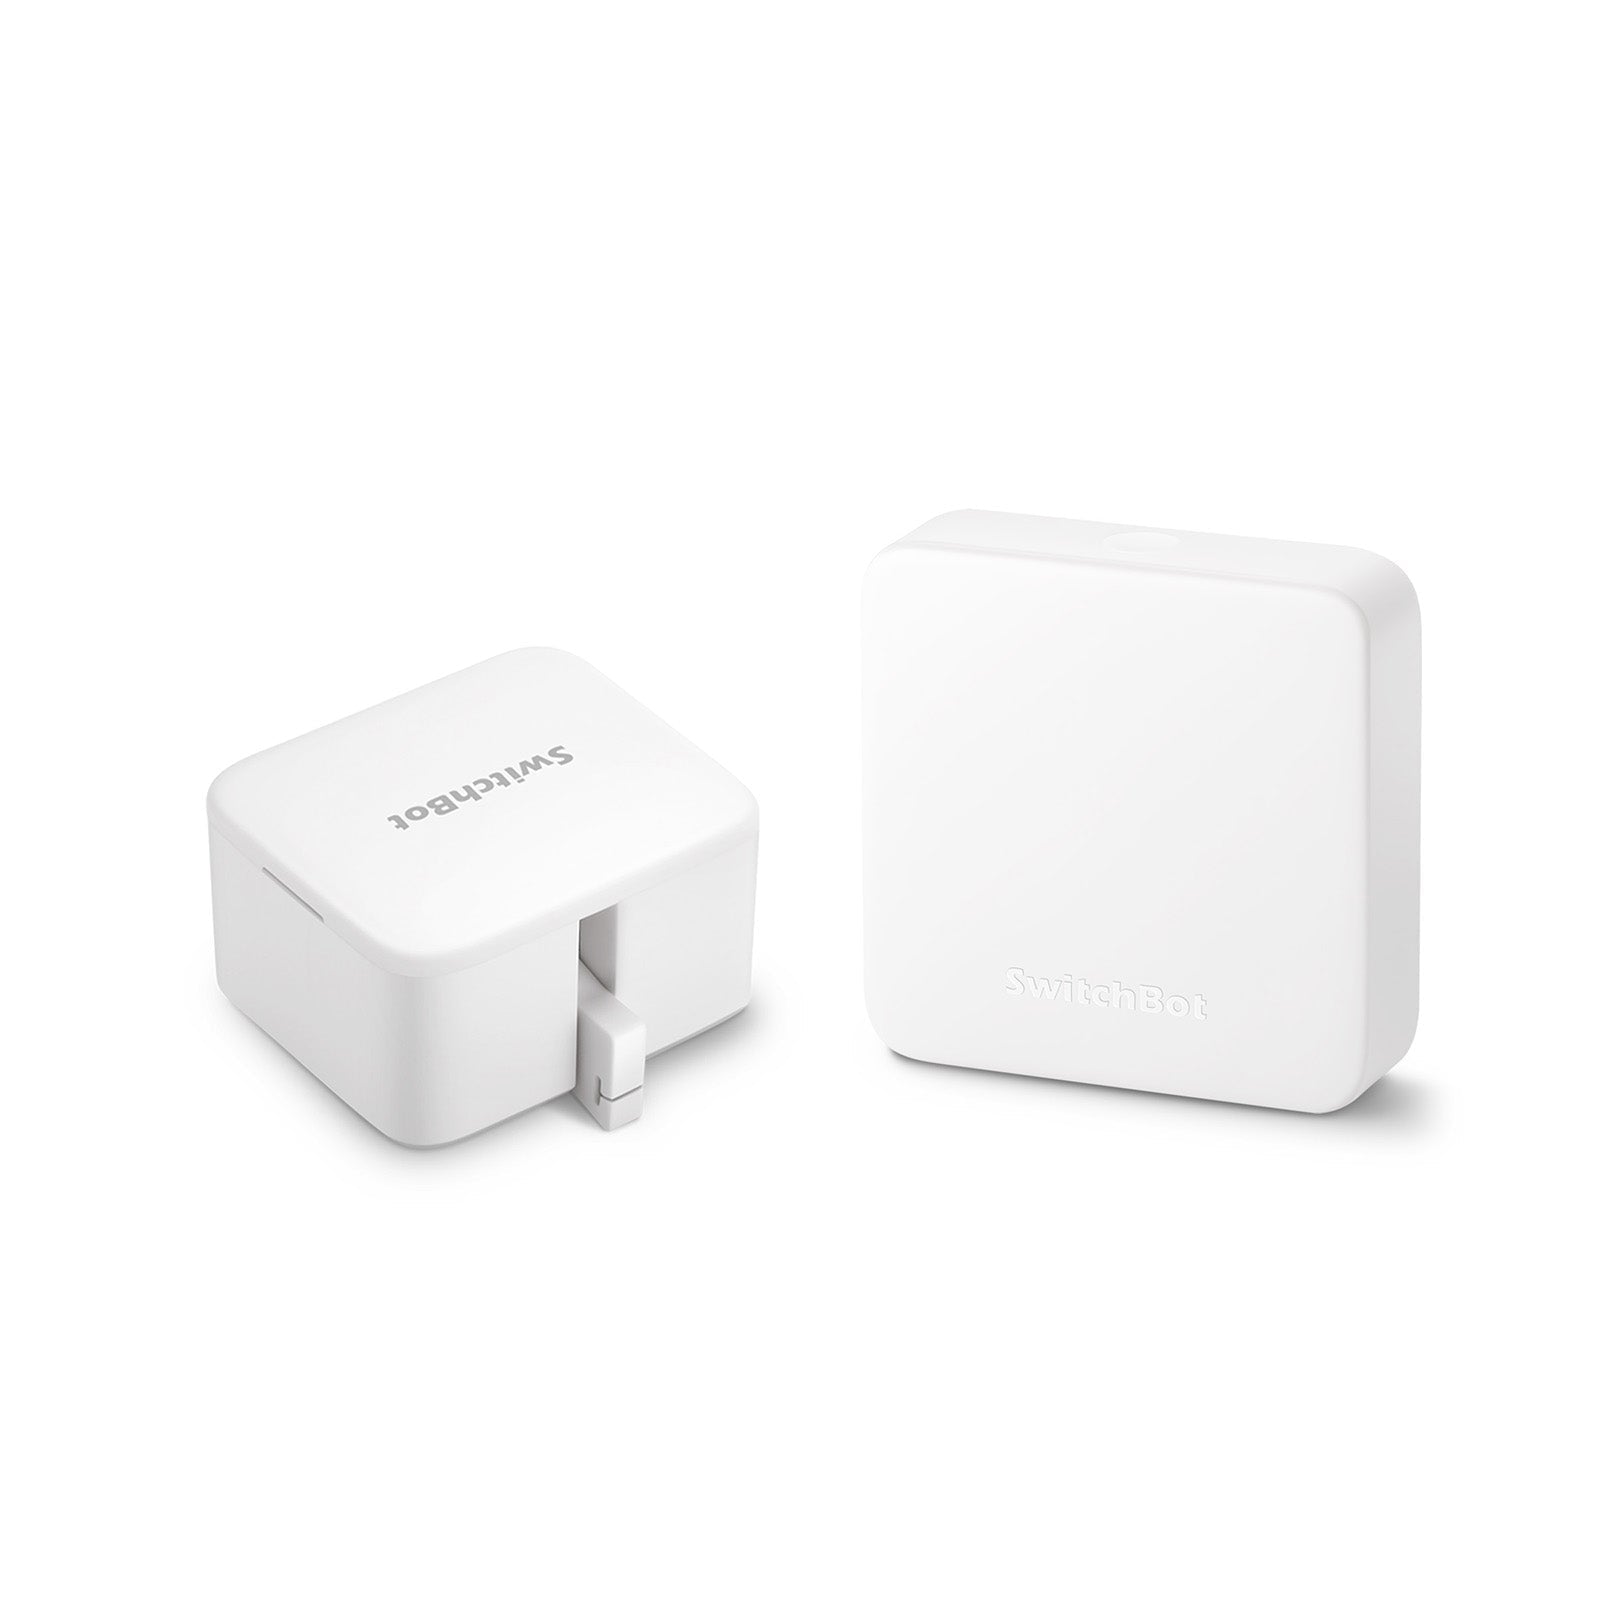 Simplify Your Life with the SwitchBot Smart Switch Button Pusher, by Home  Tech Supply